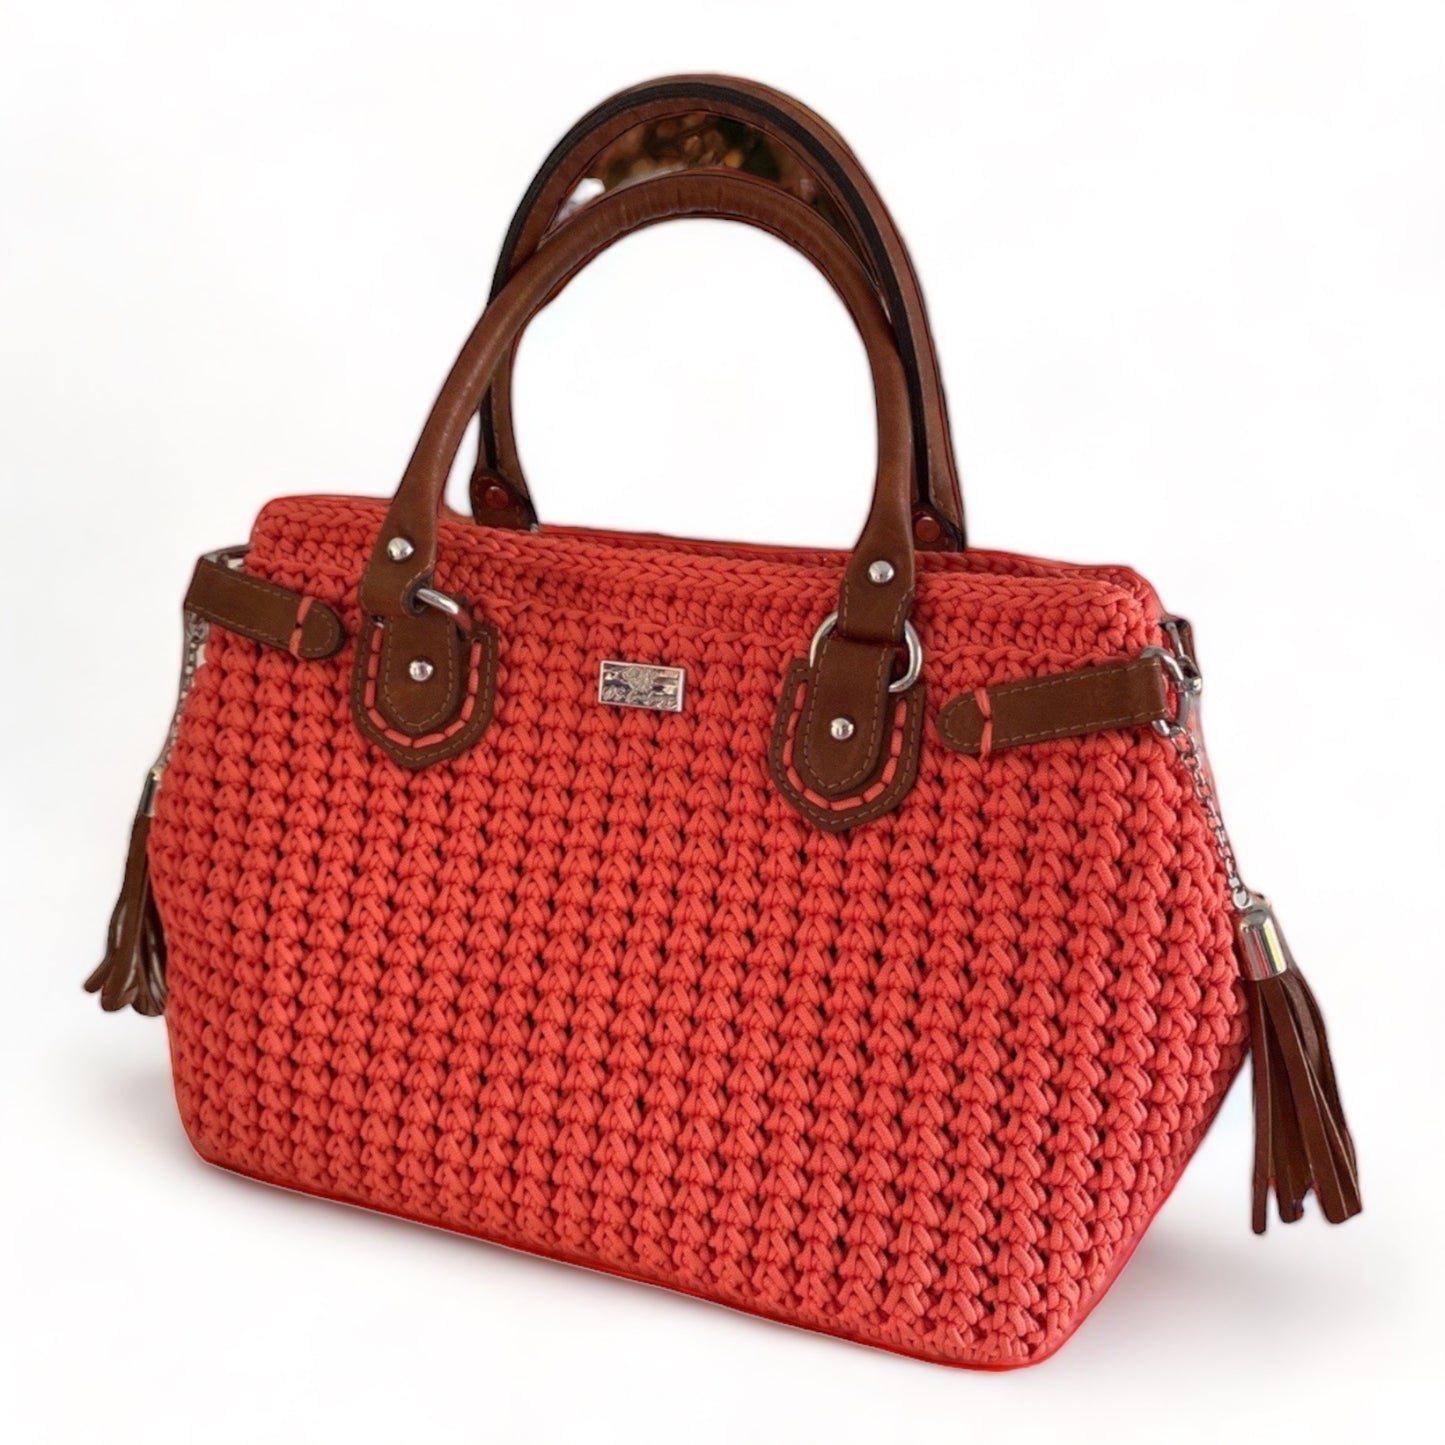 Top quality TOTE handbag with Eco leather components for fashionable ladies